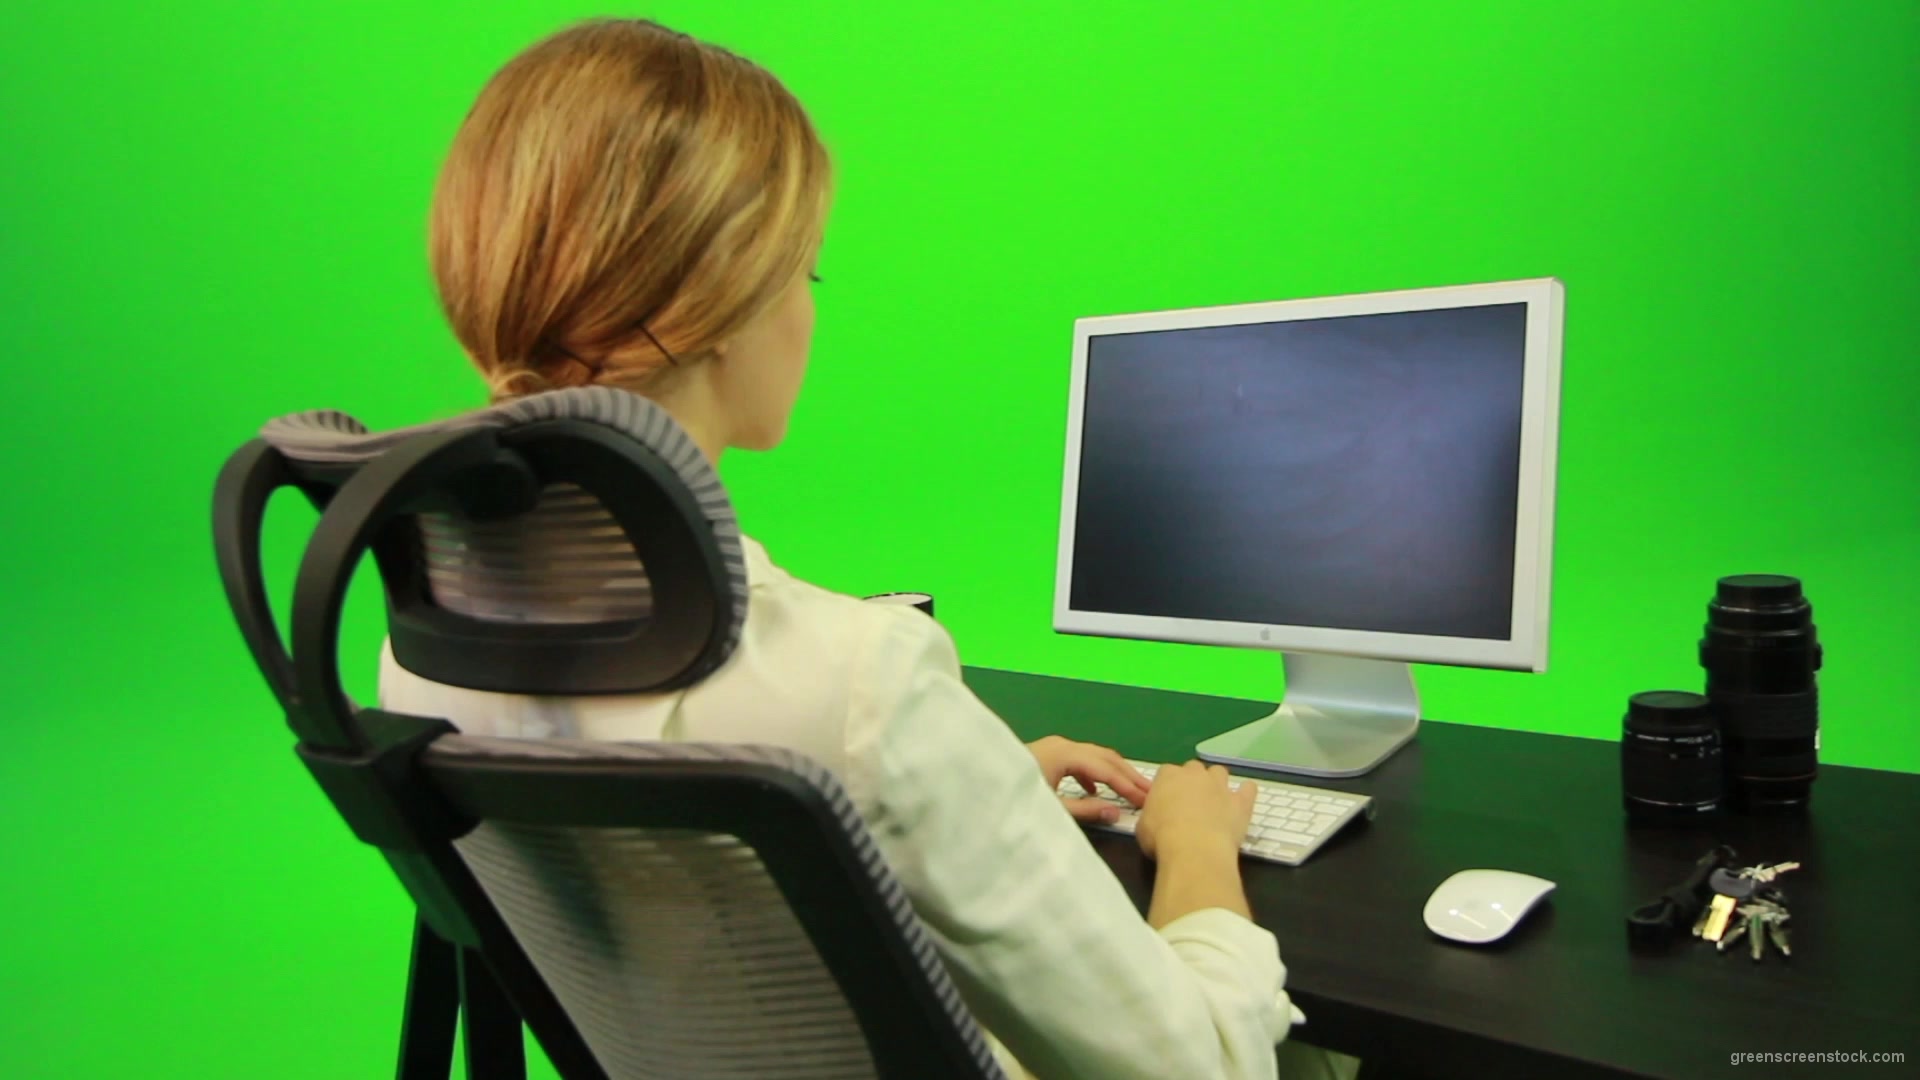 Woman-Working-on-the-Computer-5-Green-Screen-Footage_001 Green Screen Stock